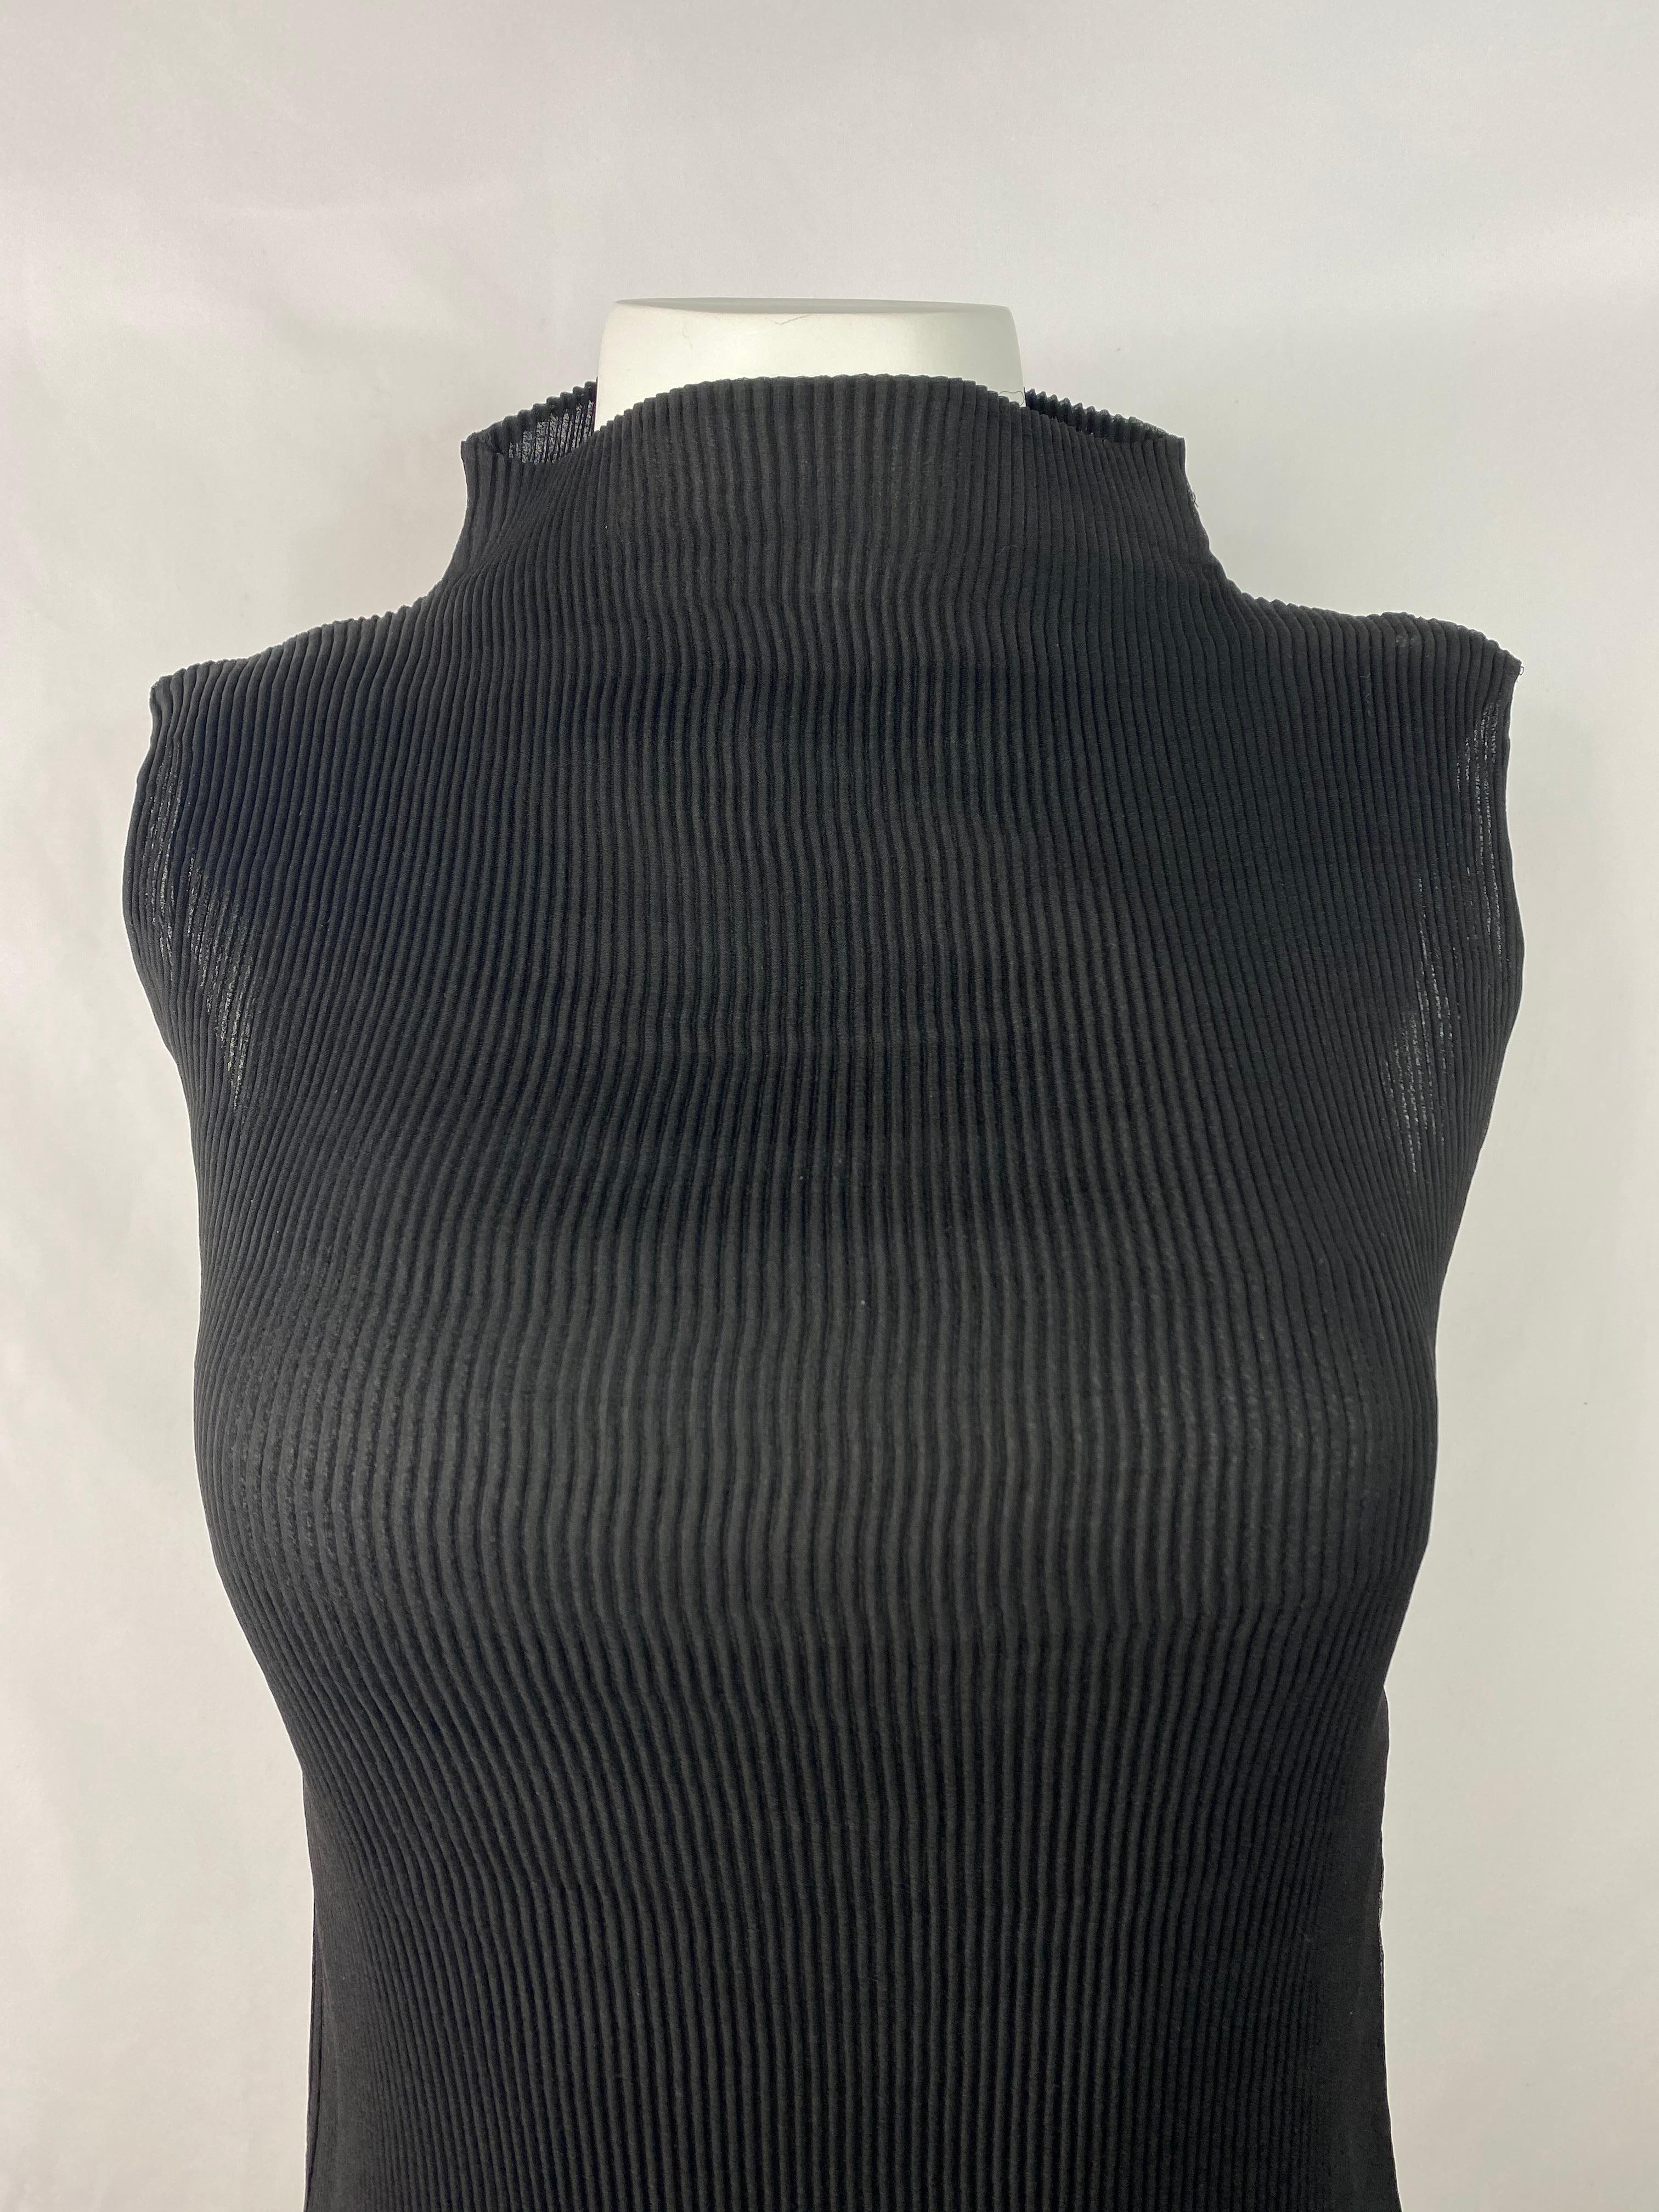 Product details:

Featuring black, sleeveless, collar, pleated detail with side ties design, measure 9